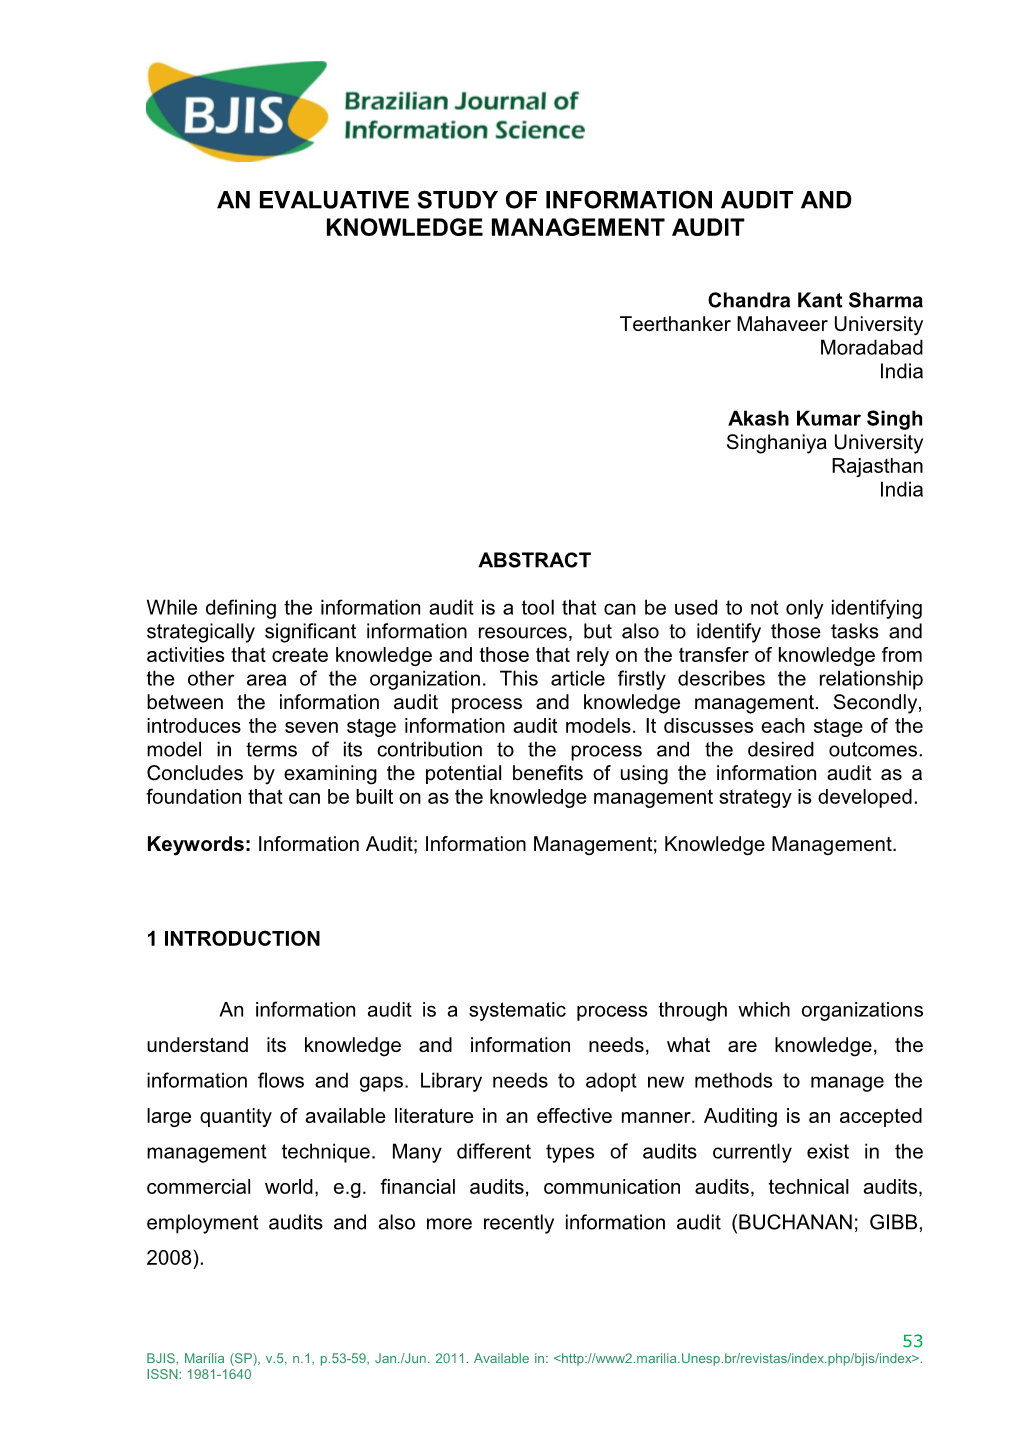 An Evaluative Study of Information Audit and Knowledge Management Audit